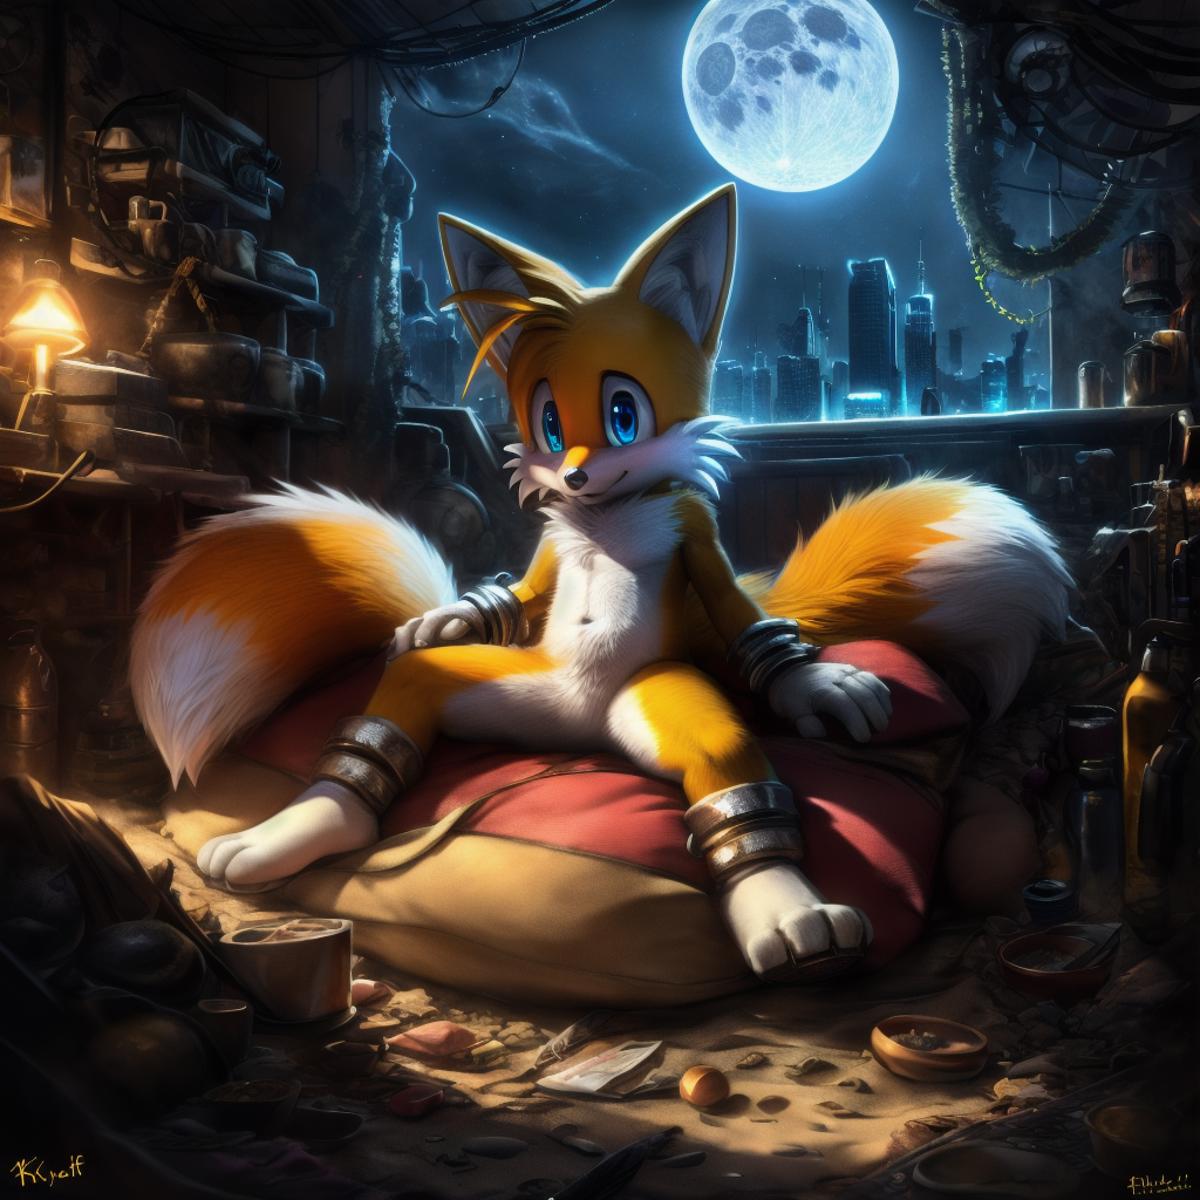 Tails - Sonic the Hedgehog image by westhelicopter2312